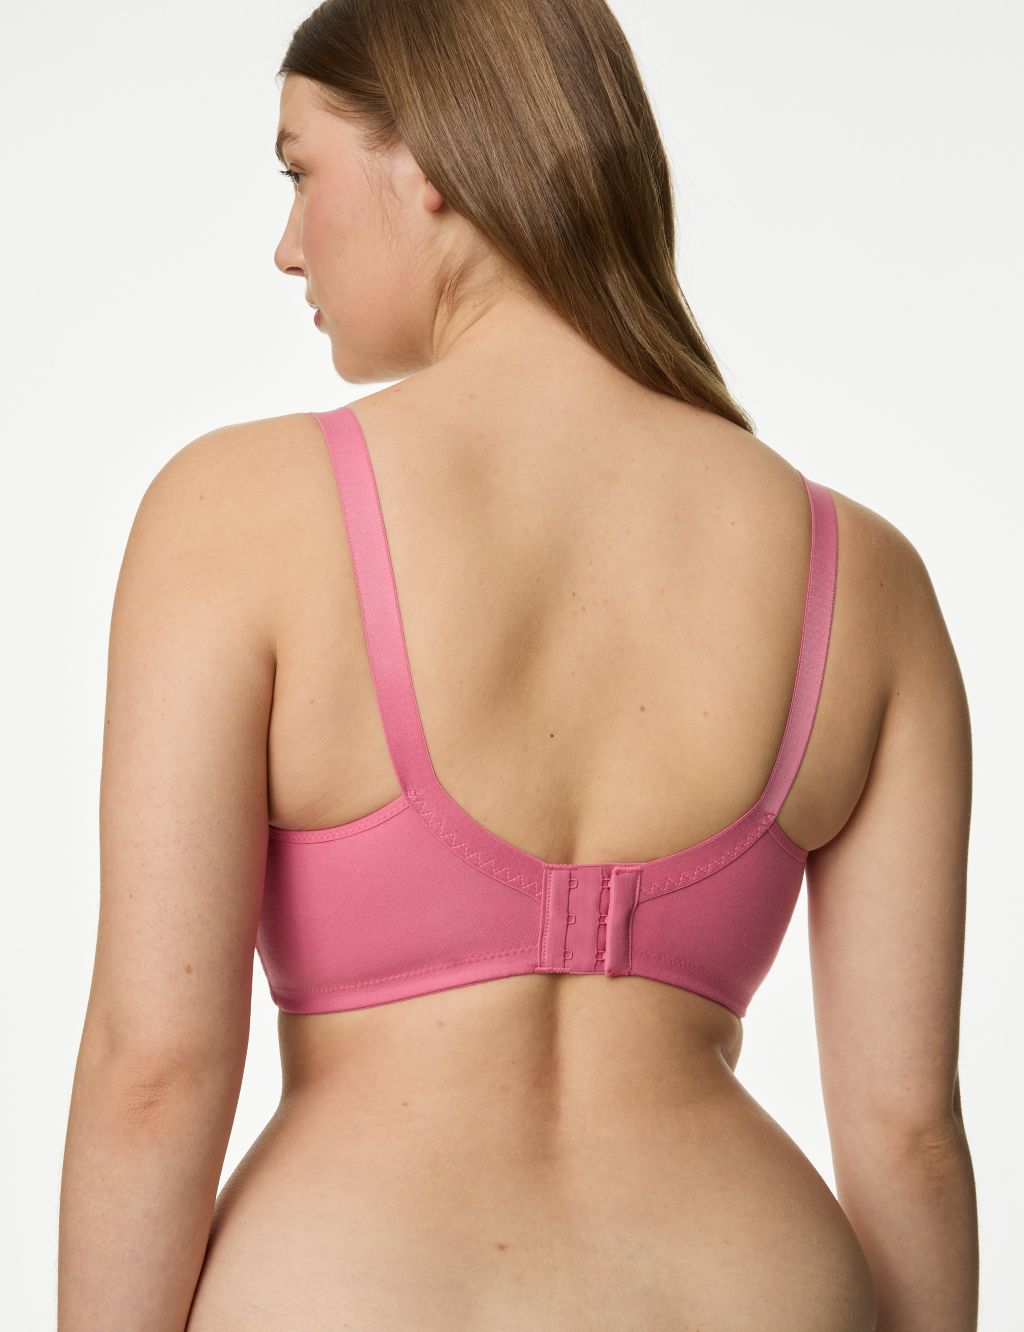 EX M*S TOTAL Support Non Wired Embroidered Full Cup Bra 3 Colours All Sizes  (ZZ) £22.99 - PicClick UK